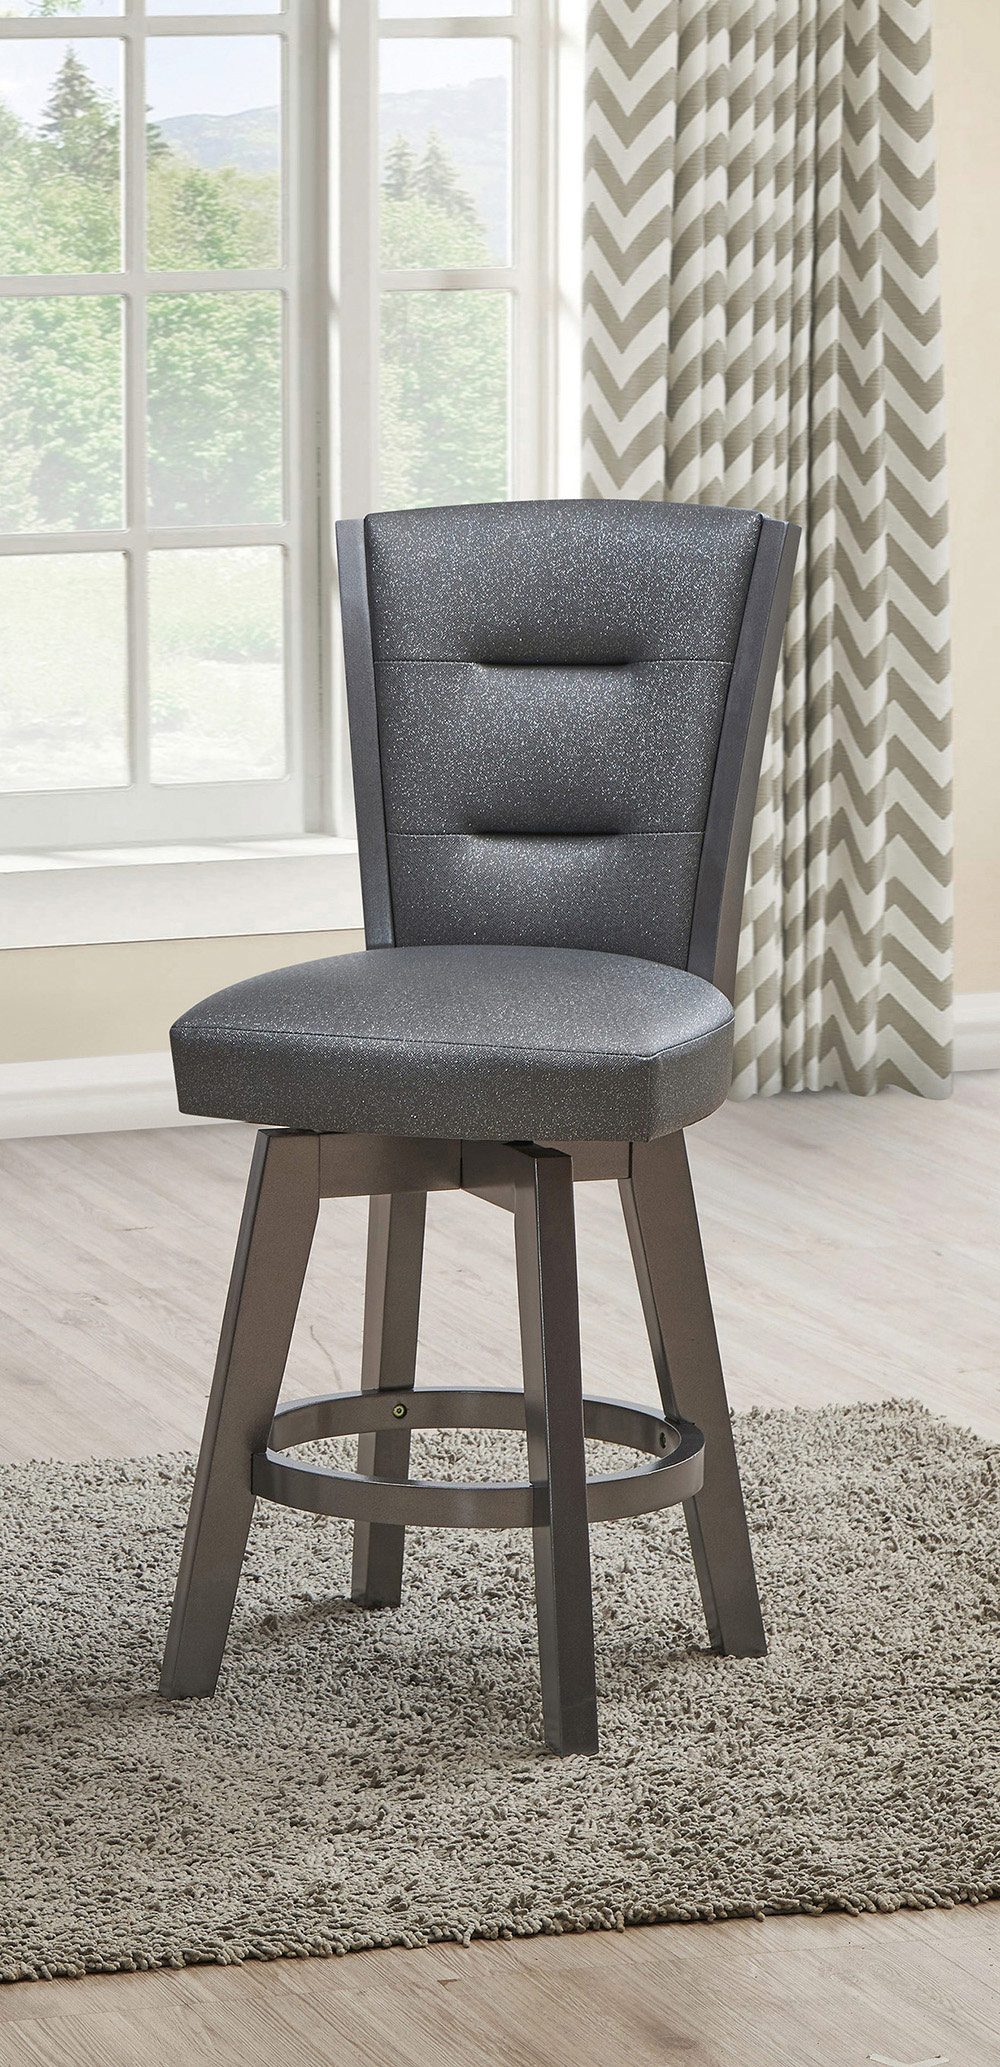 Faux Leather Upholstered Dining Chair Set of 2, with Backrest, and Wooden Frame, for Restaurant, Cafe, Tavern, Office, Living Room - Gray